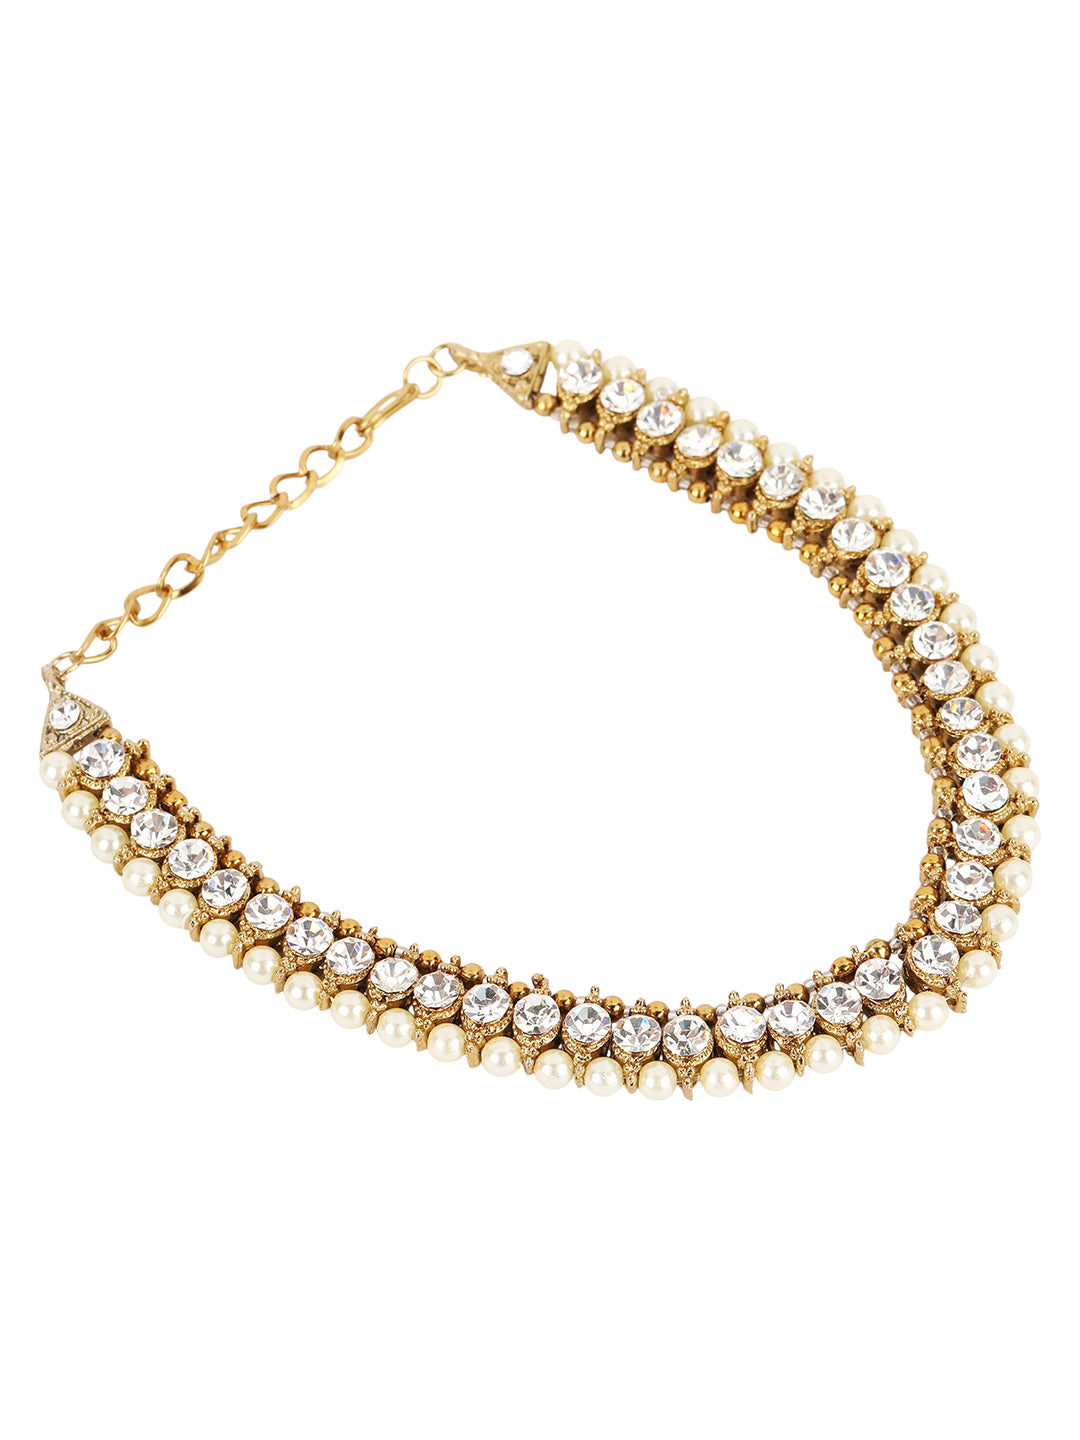 Women's Traditional Gold Plated Kundan Pearl Bridal Wear Anklet - Anikas Creation